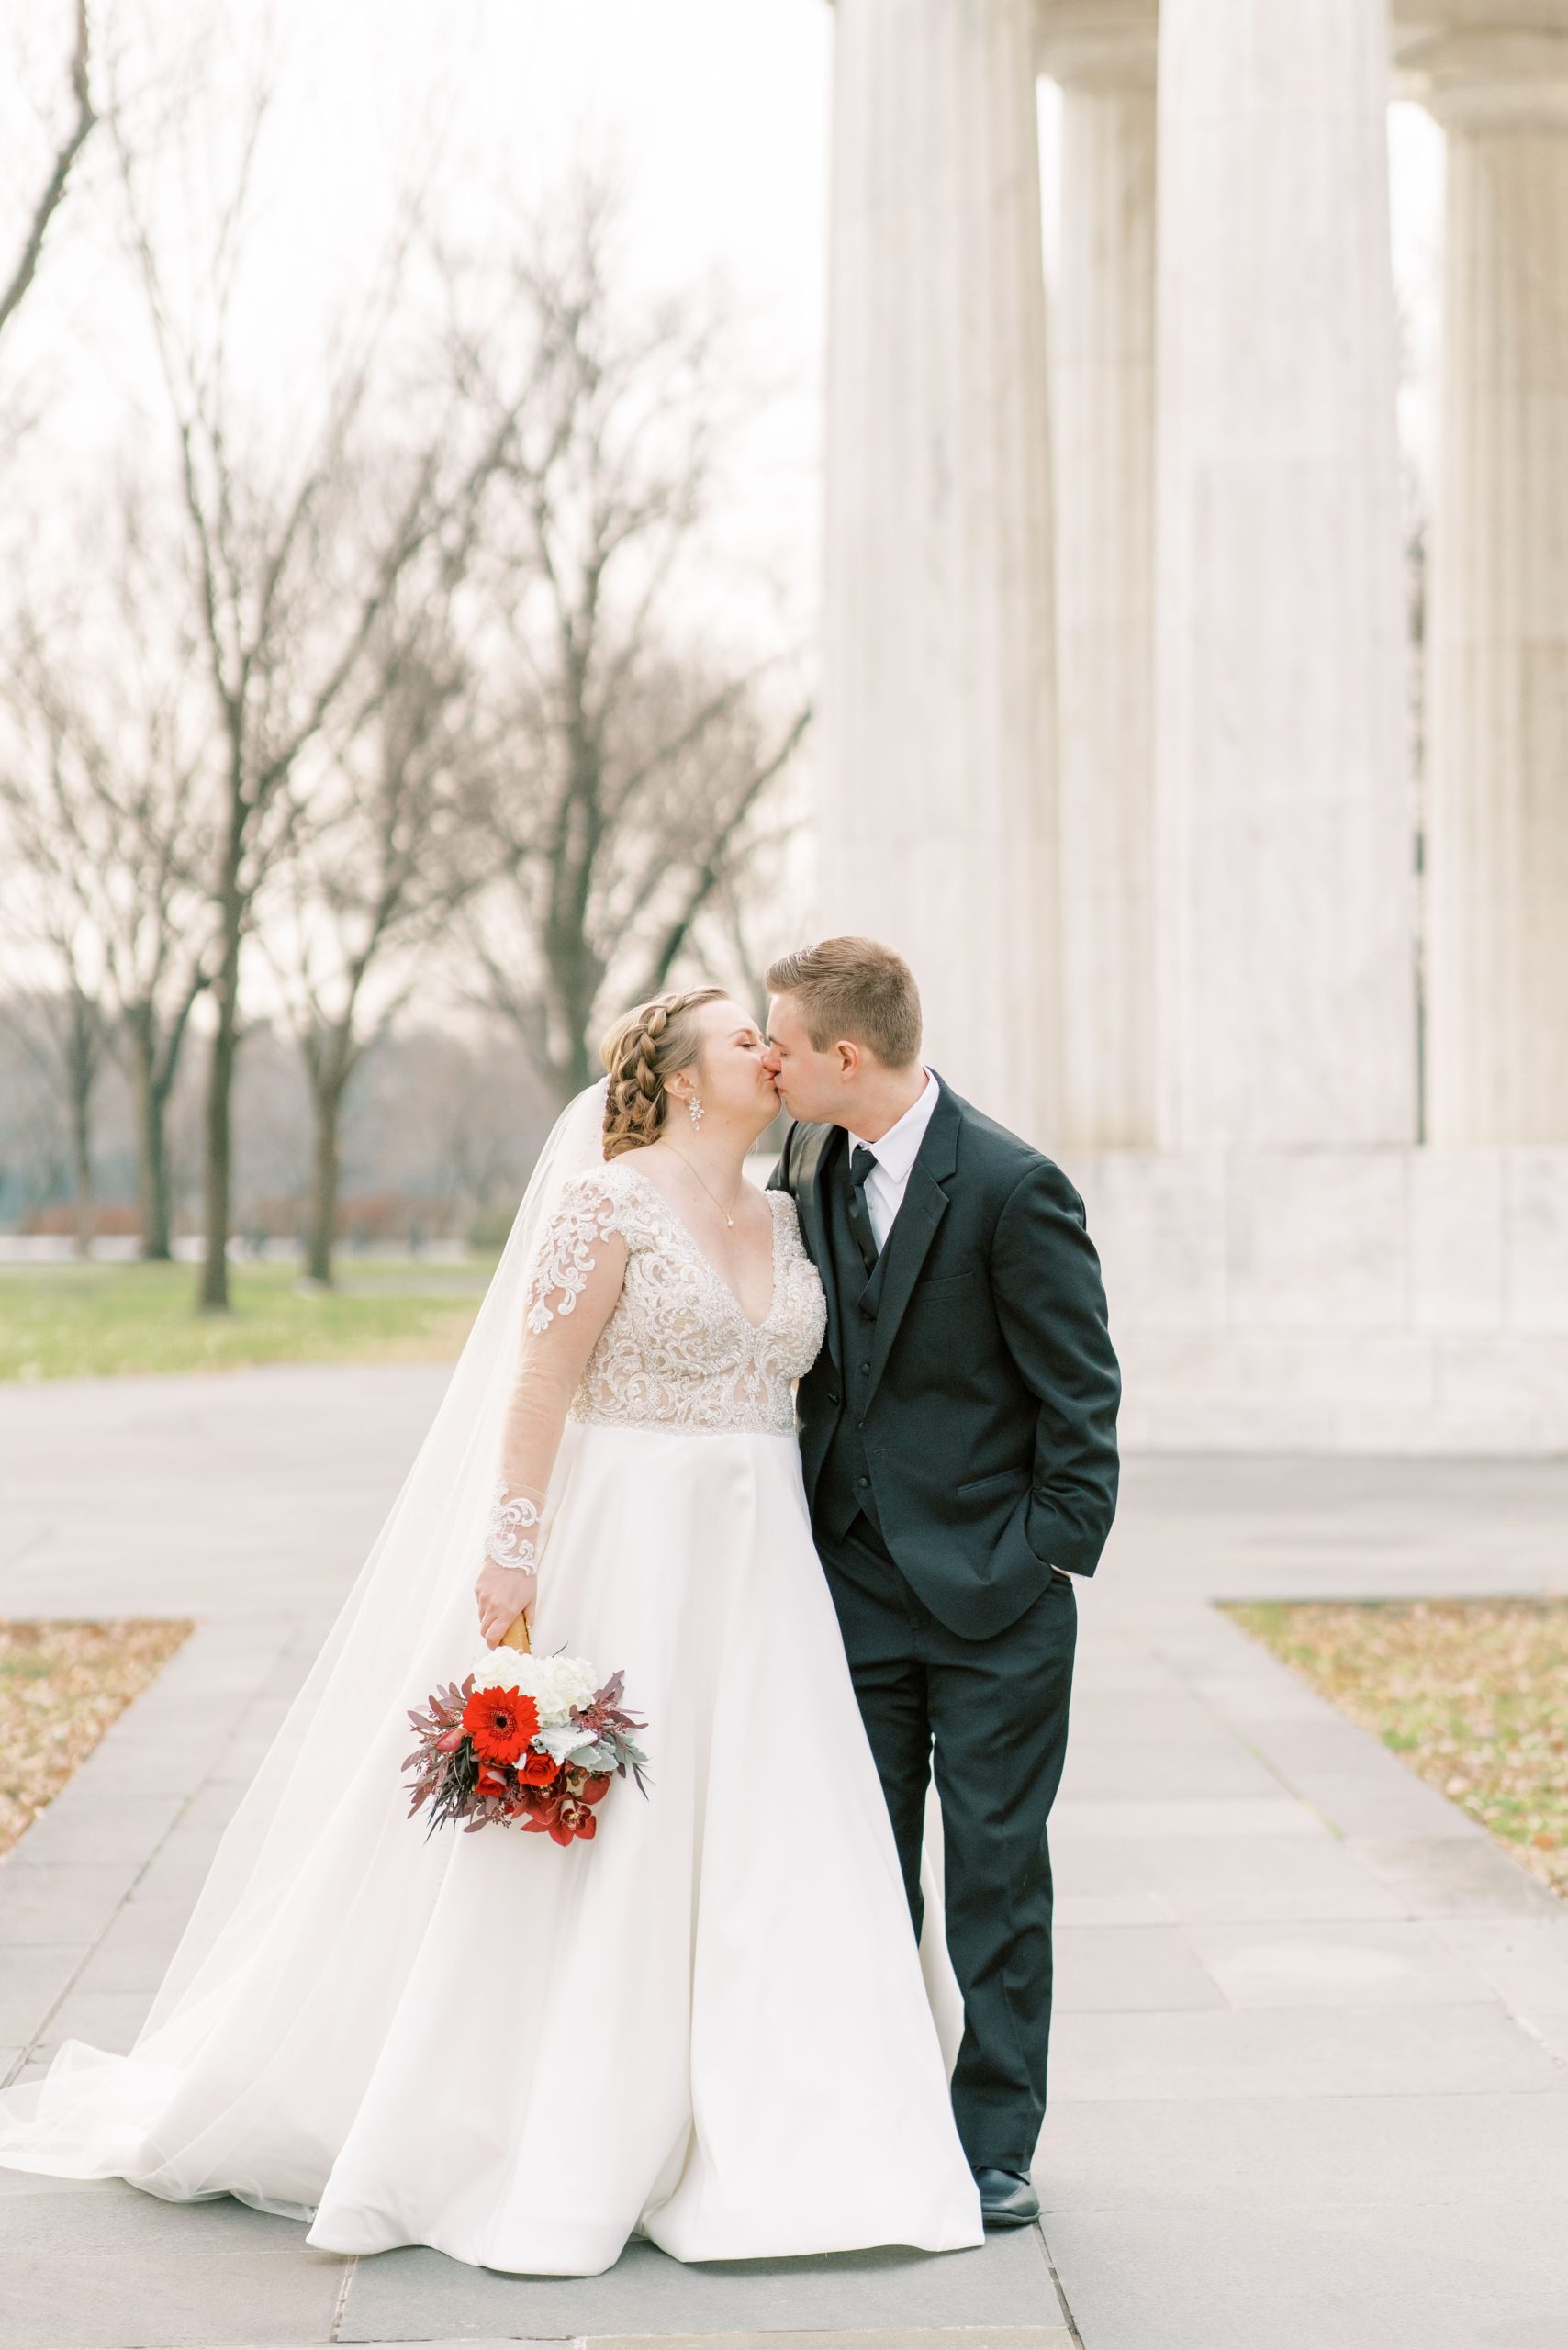 A wintery wedding elopement at the DC War Memorial in Washington, DC with portraits at the Lincoln Memorial and Washington Monument.